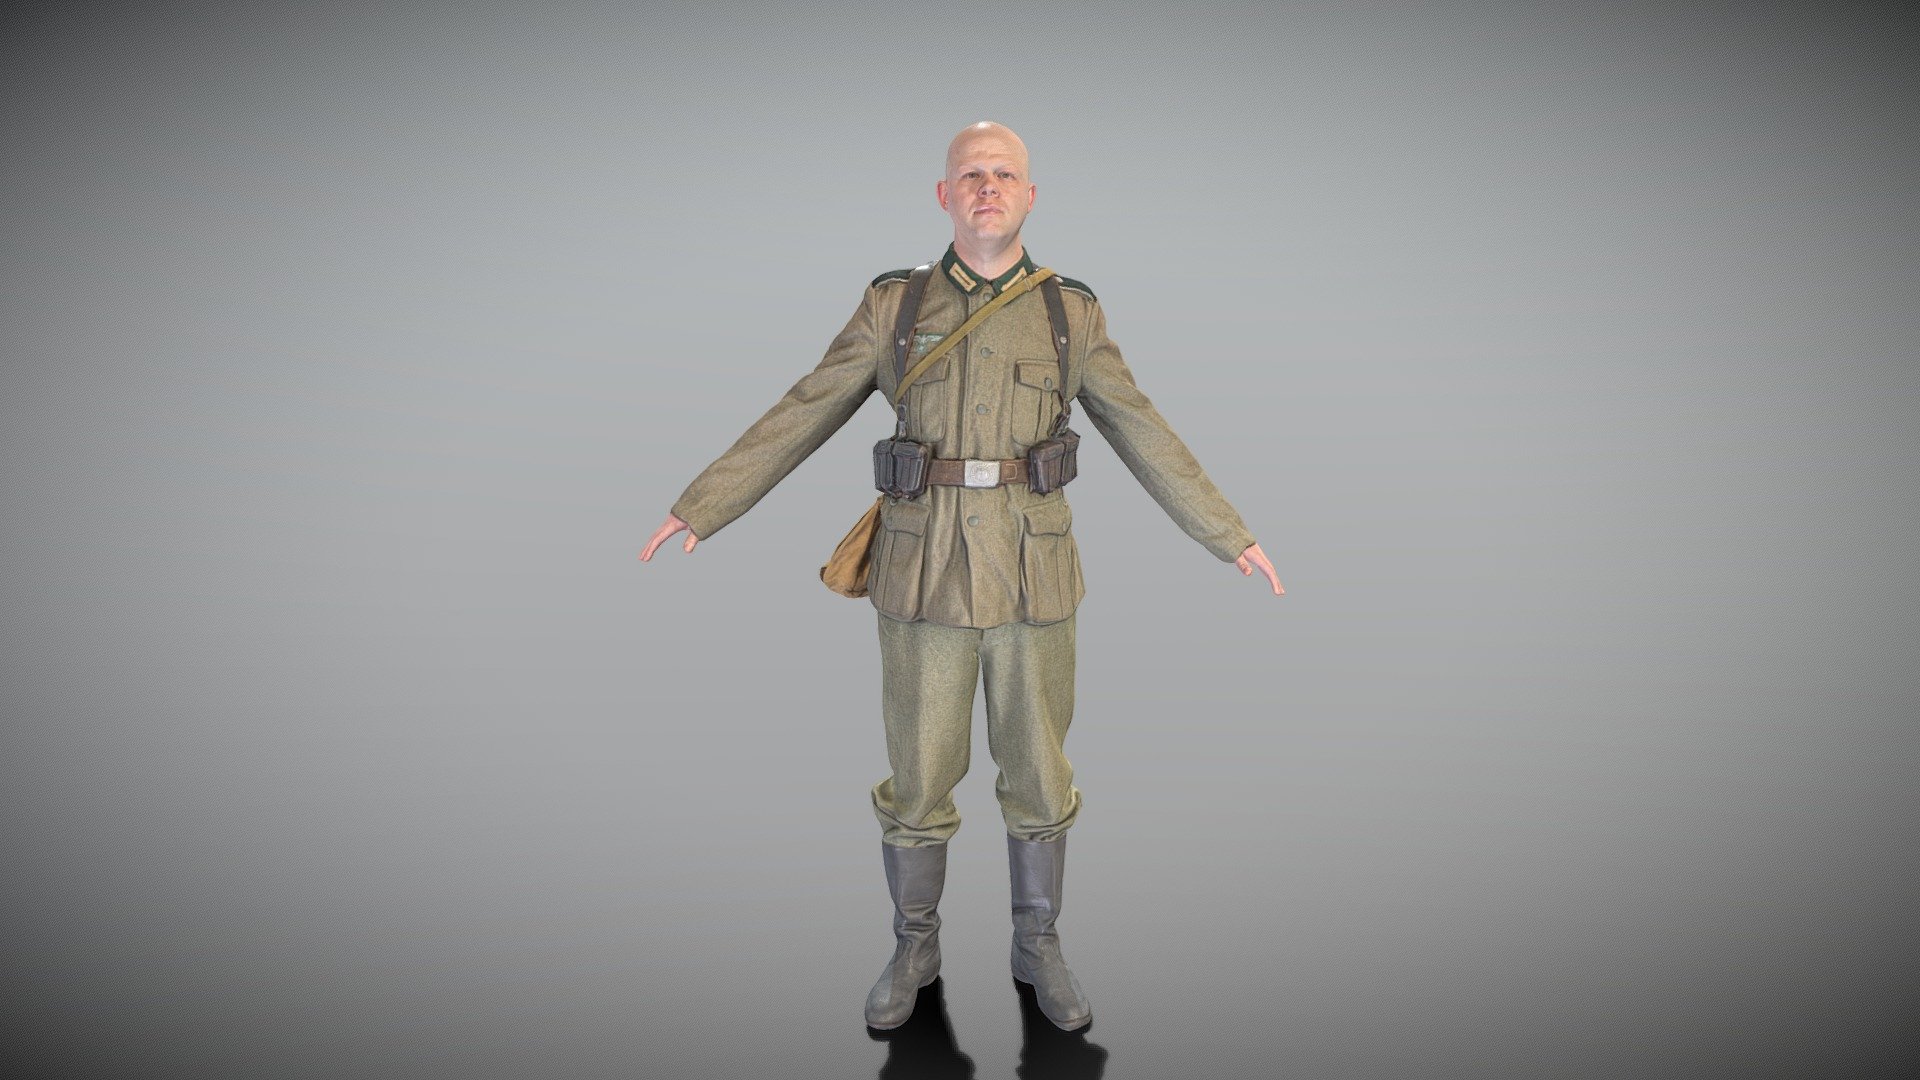 This is a true human size and detailed model of a brave soldier dressed in Wehrmacht uniform from WW2. All props and suit are original. The model is captured in the A-pose with mesh ready for rigging and animation in all most usable 3d software.

Technical specifications:




digital double scan model

low-poly model

high-poly model (.ztl tool with 5-6 subdivisions) clean and retopologized automatically via ZRemesher

fully quad topology

sufficiently clean

edge Loops based

ready for subdivision

8K texture color map

non-overlapping UV map

ready for animation

PBR textures 8K resolution: Normal, Displacement, Albedo maps

Download package includes a Cinema 4D project file with Redshift shader, OBJ, FBX, STL files, which are applicable for 3ds Max, Maya, Unreal Engine, Unity, Blender, etc. All the textures you will find in the “Tex” folder, included into the main archive.

3D EVERYTHING

Stand with Ukraine! - German Wehrmacht soldier ready for animation 423 - Buy Royalty Free 3D model by deep3dstudio 3d model